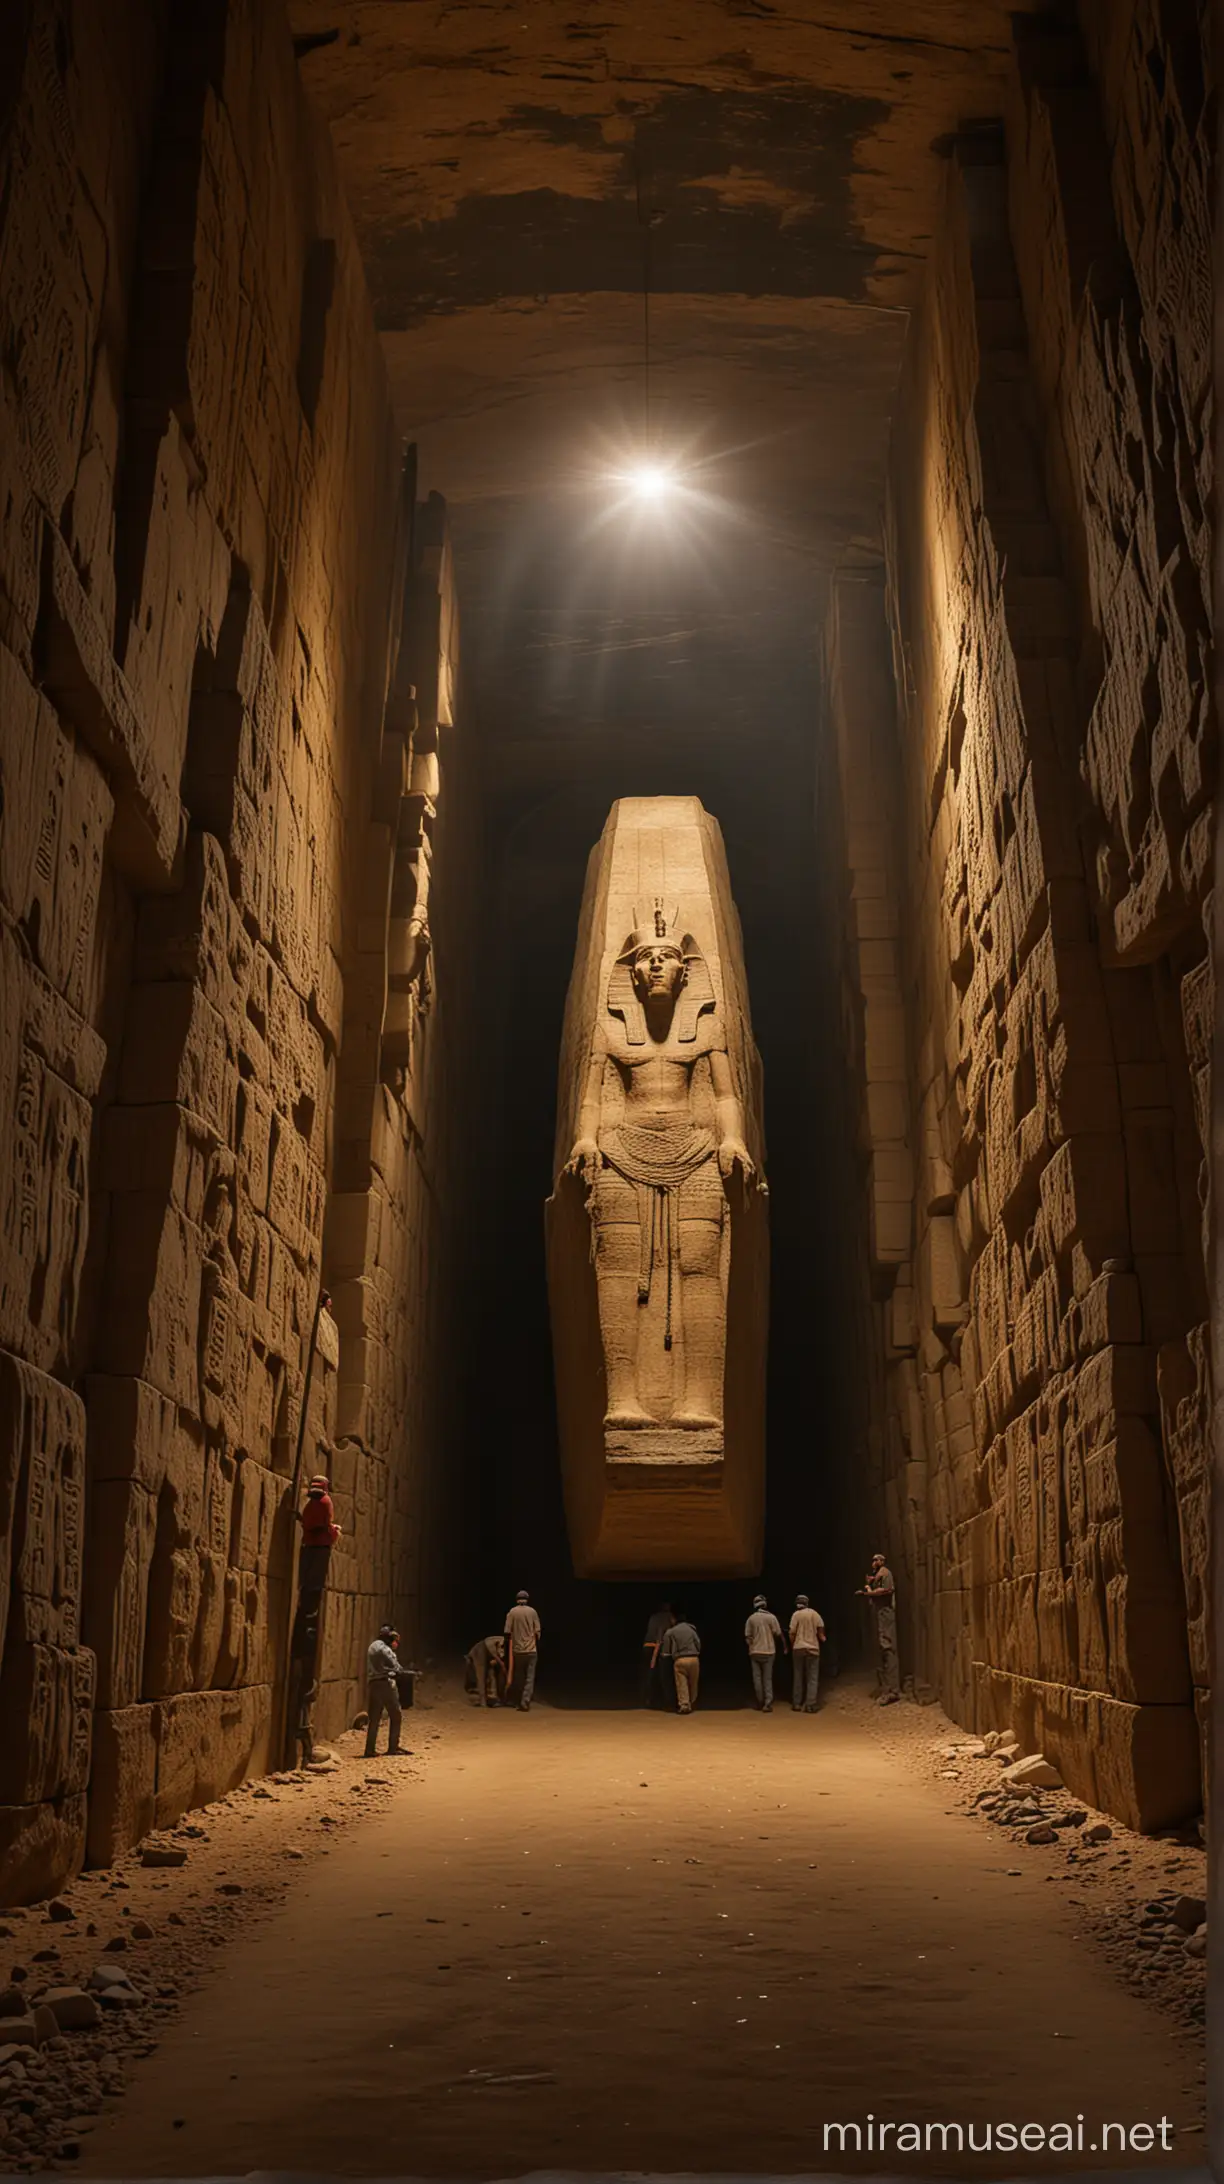 Ancient Egyptian Tomb Workers Maneuvering Massive Stone Coffin in Dimly Lit Tunnel